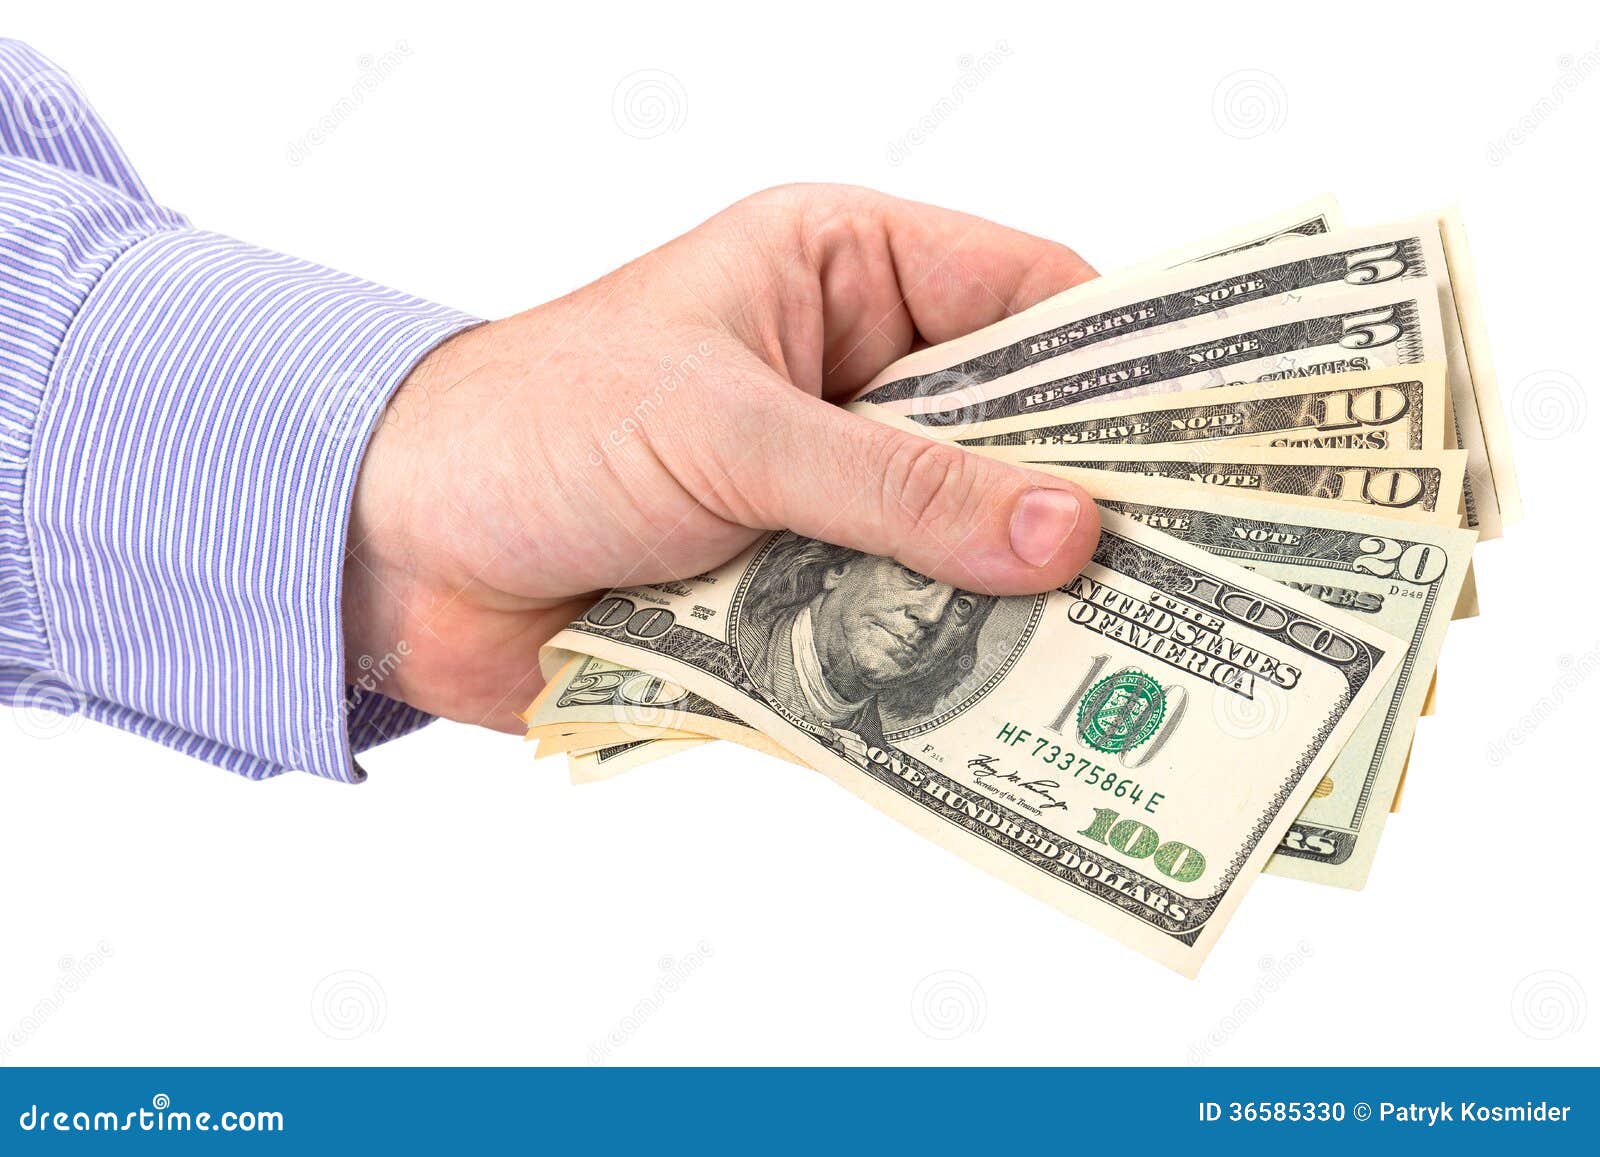 Cash in Hand of Businessman Stock Photo - Image of business, holding